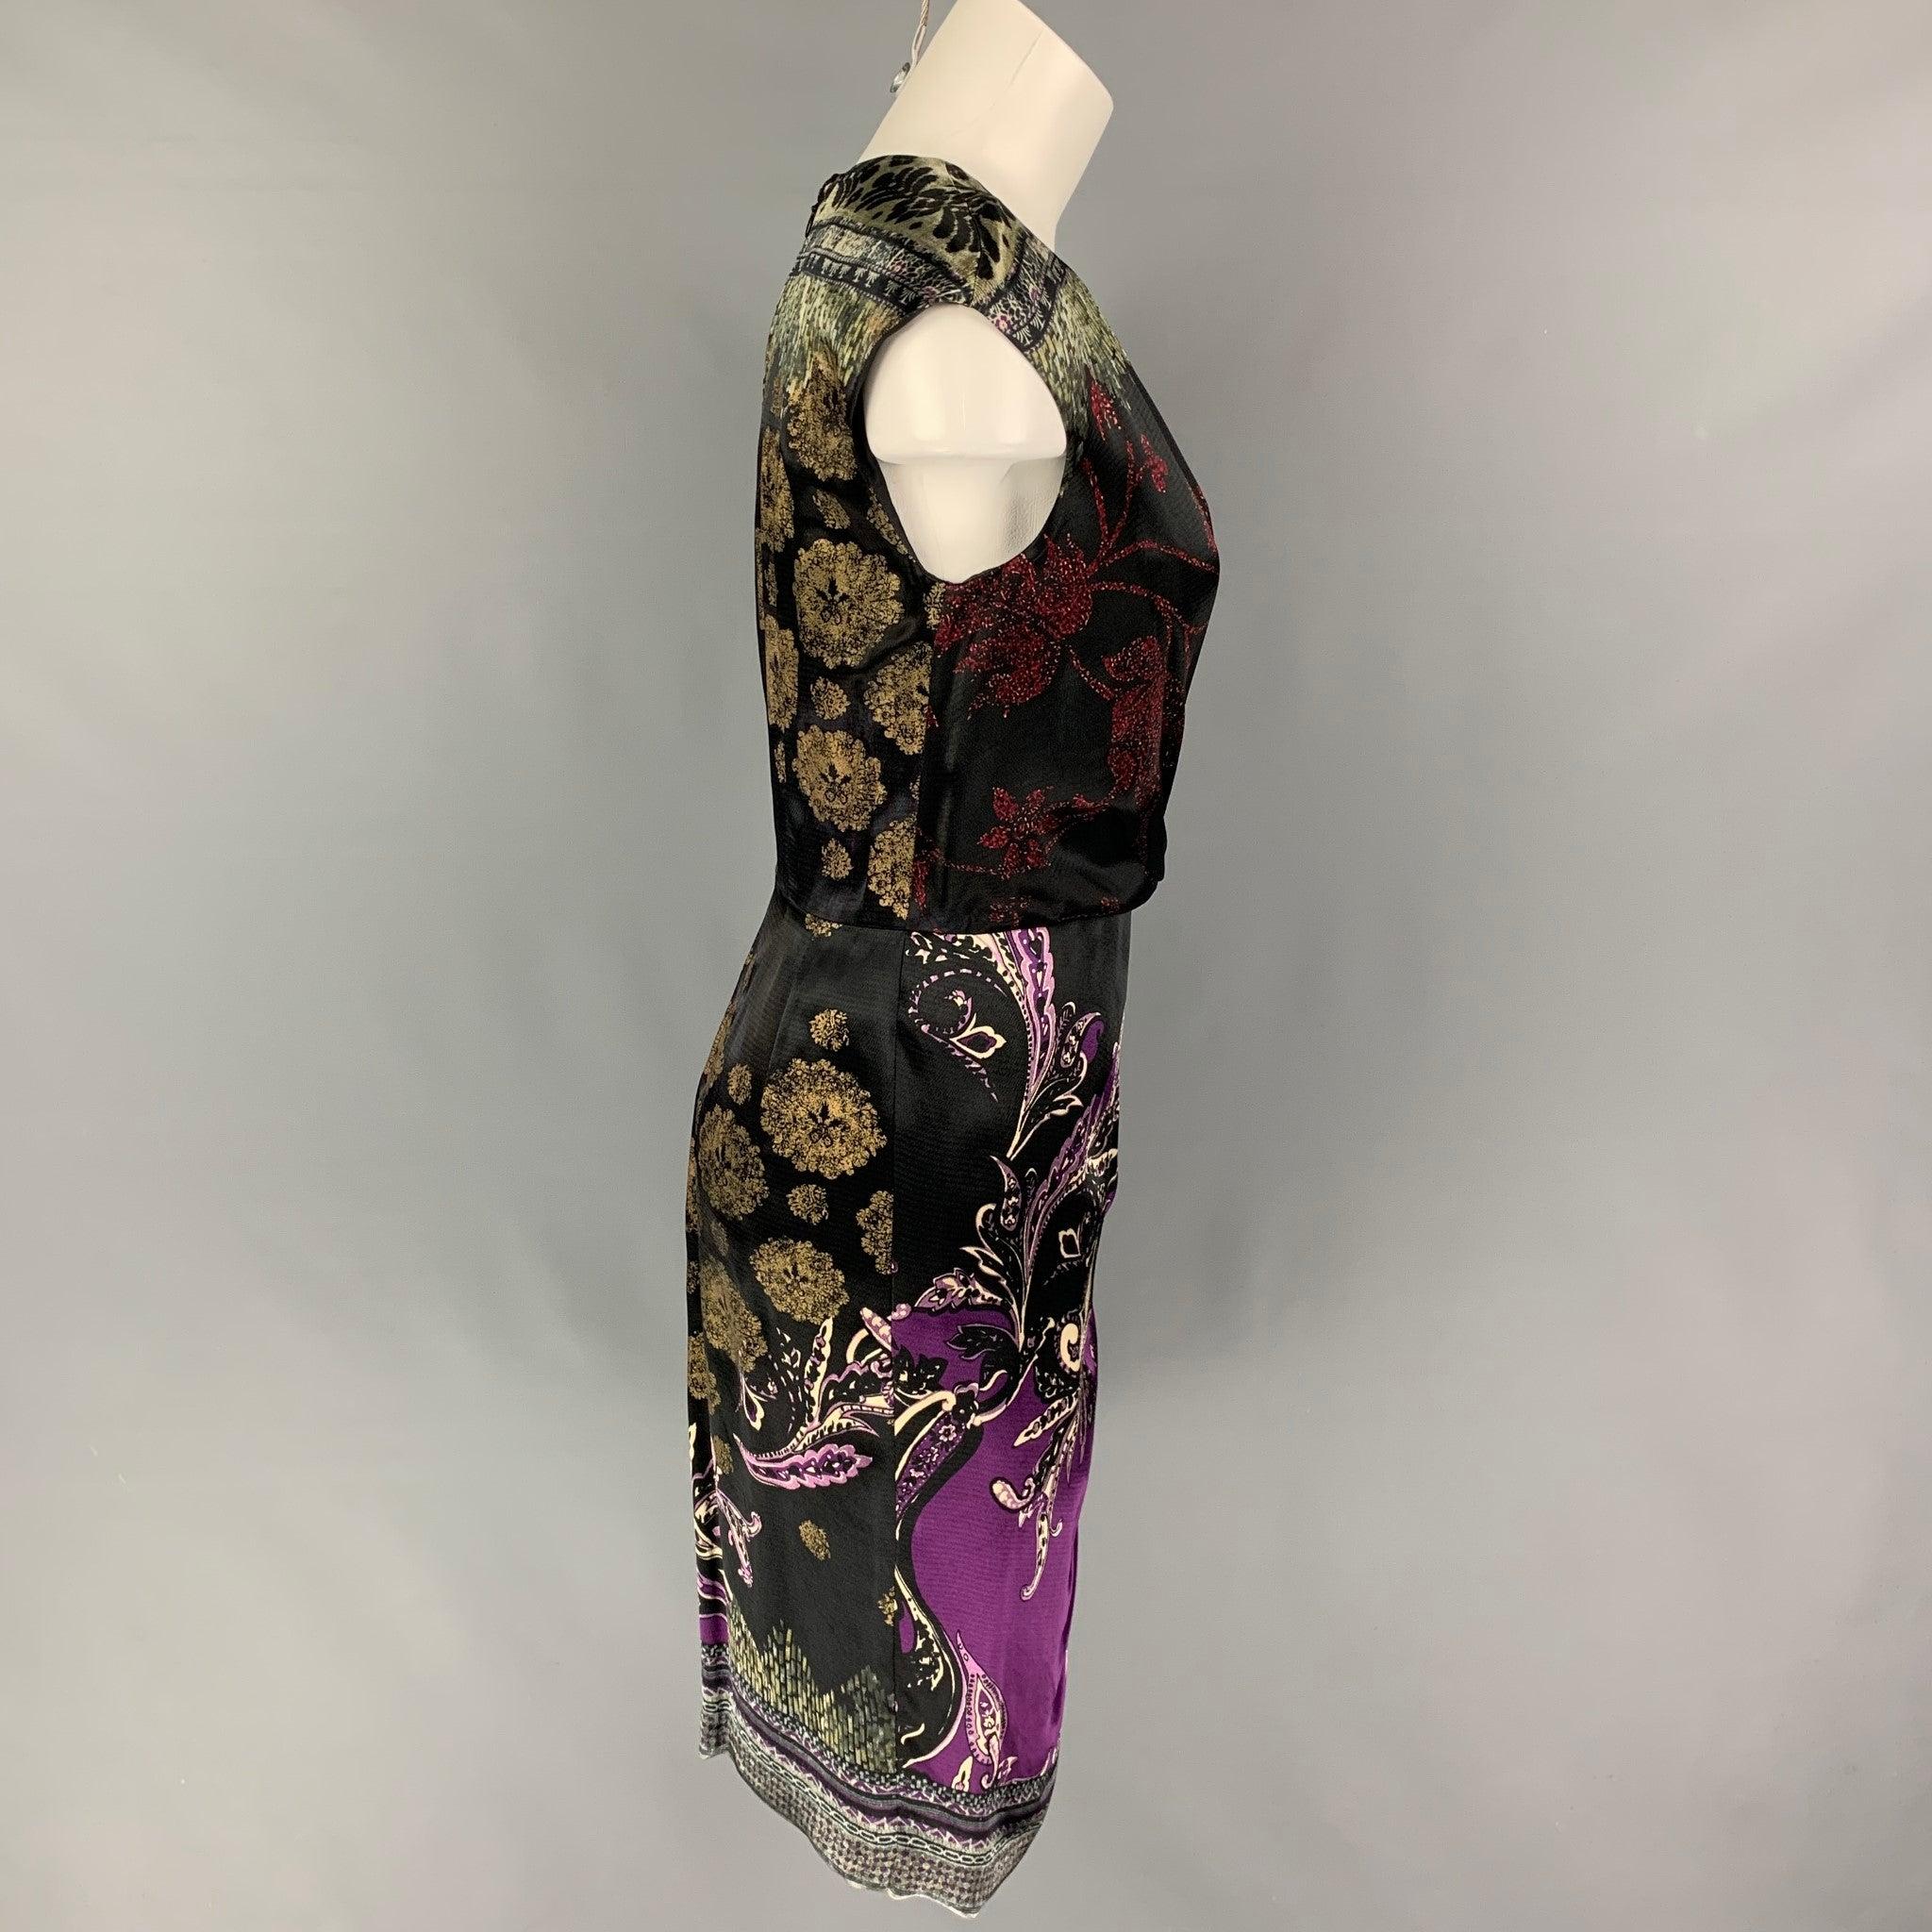 ETRO dress comes in a black multi-color abstract floral viscose featuring a ruched design, sleeveless, front slit, and a back zip up closure. Made in Italy. New With Tags. 

Marked:   42 

Measurements: 
 
Shoulder: 18 inches  Bust:
30 inches 